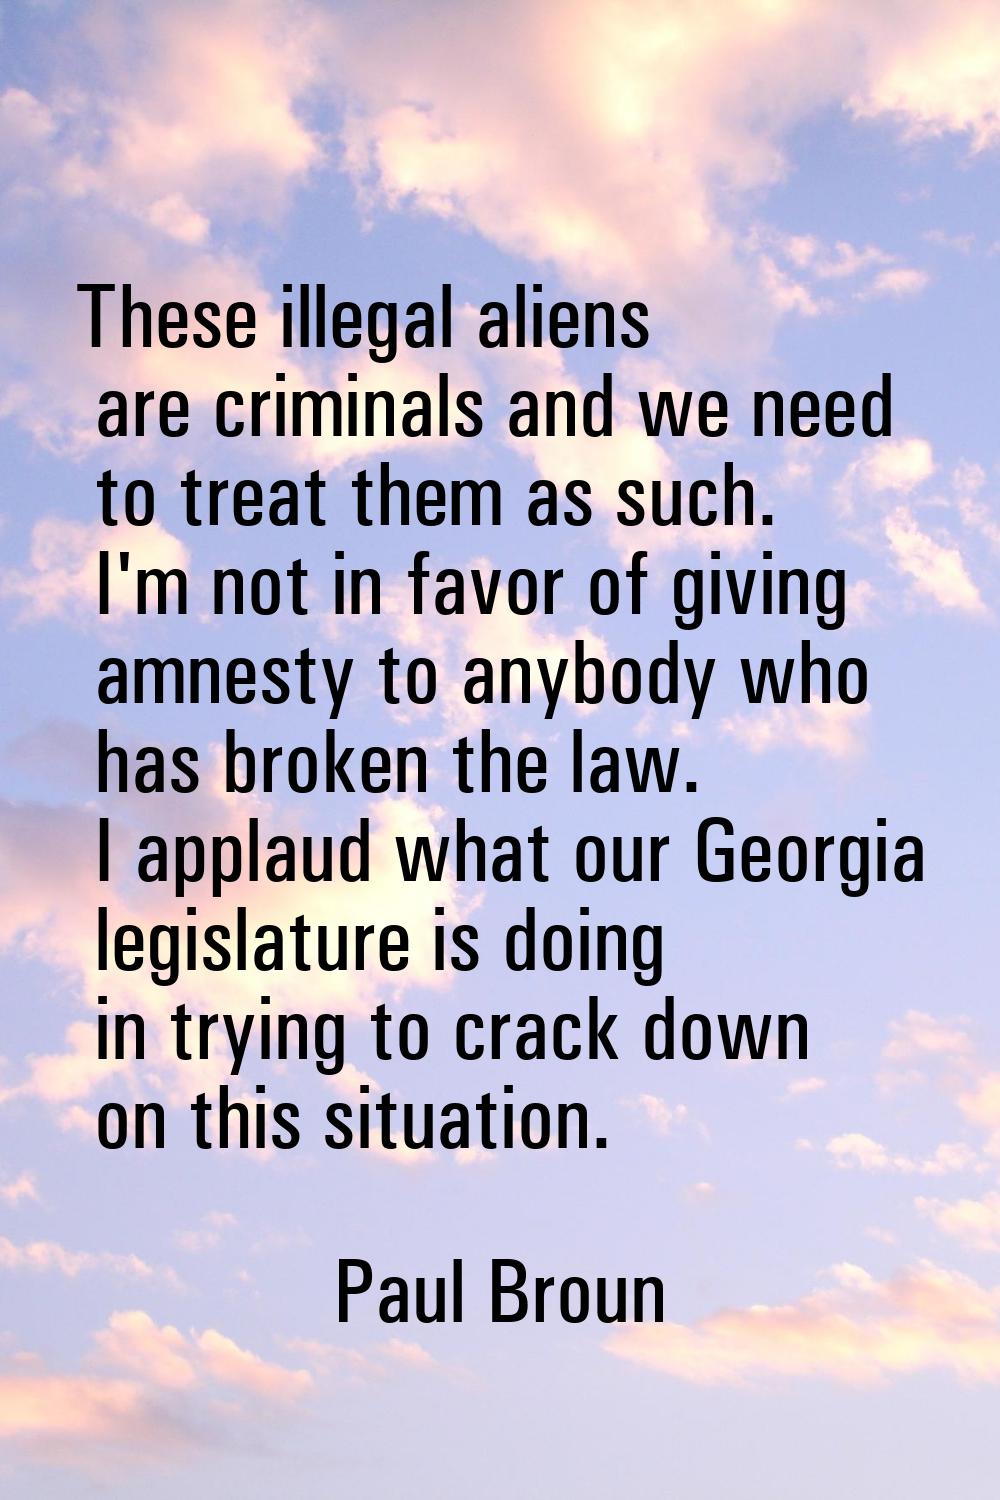 These illegal aliens are criminals and we need to treat them as such. I'm not in favor of giving am